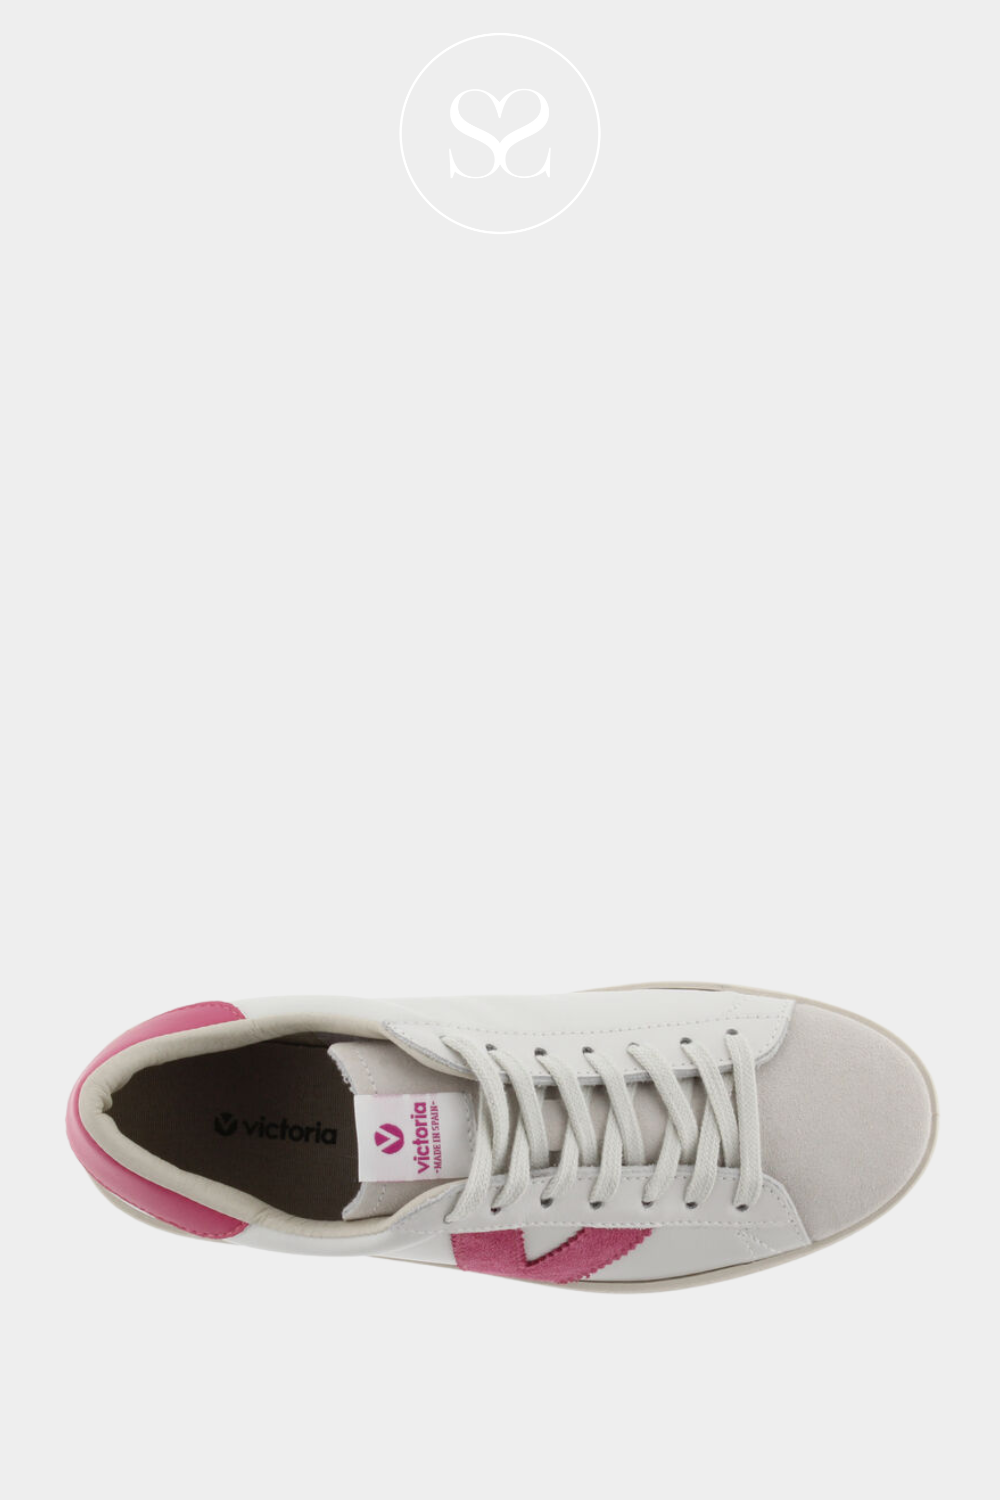 VICTORIA 126142 WHITE FLAT LACED TRAINER WITH SUEDE TOE AND PINK V ON THE SIDE